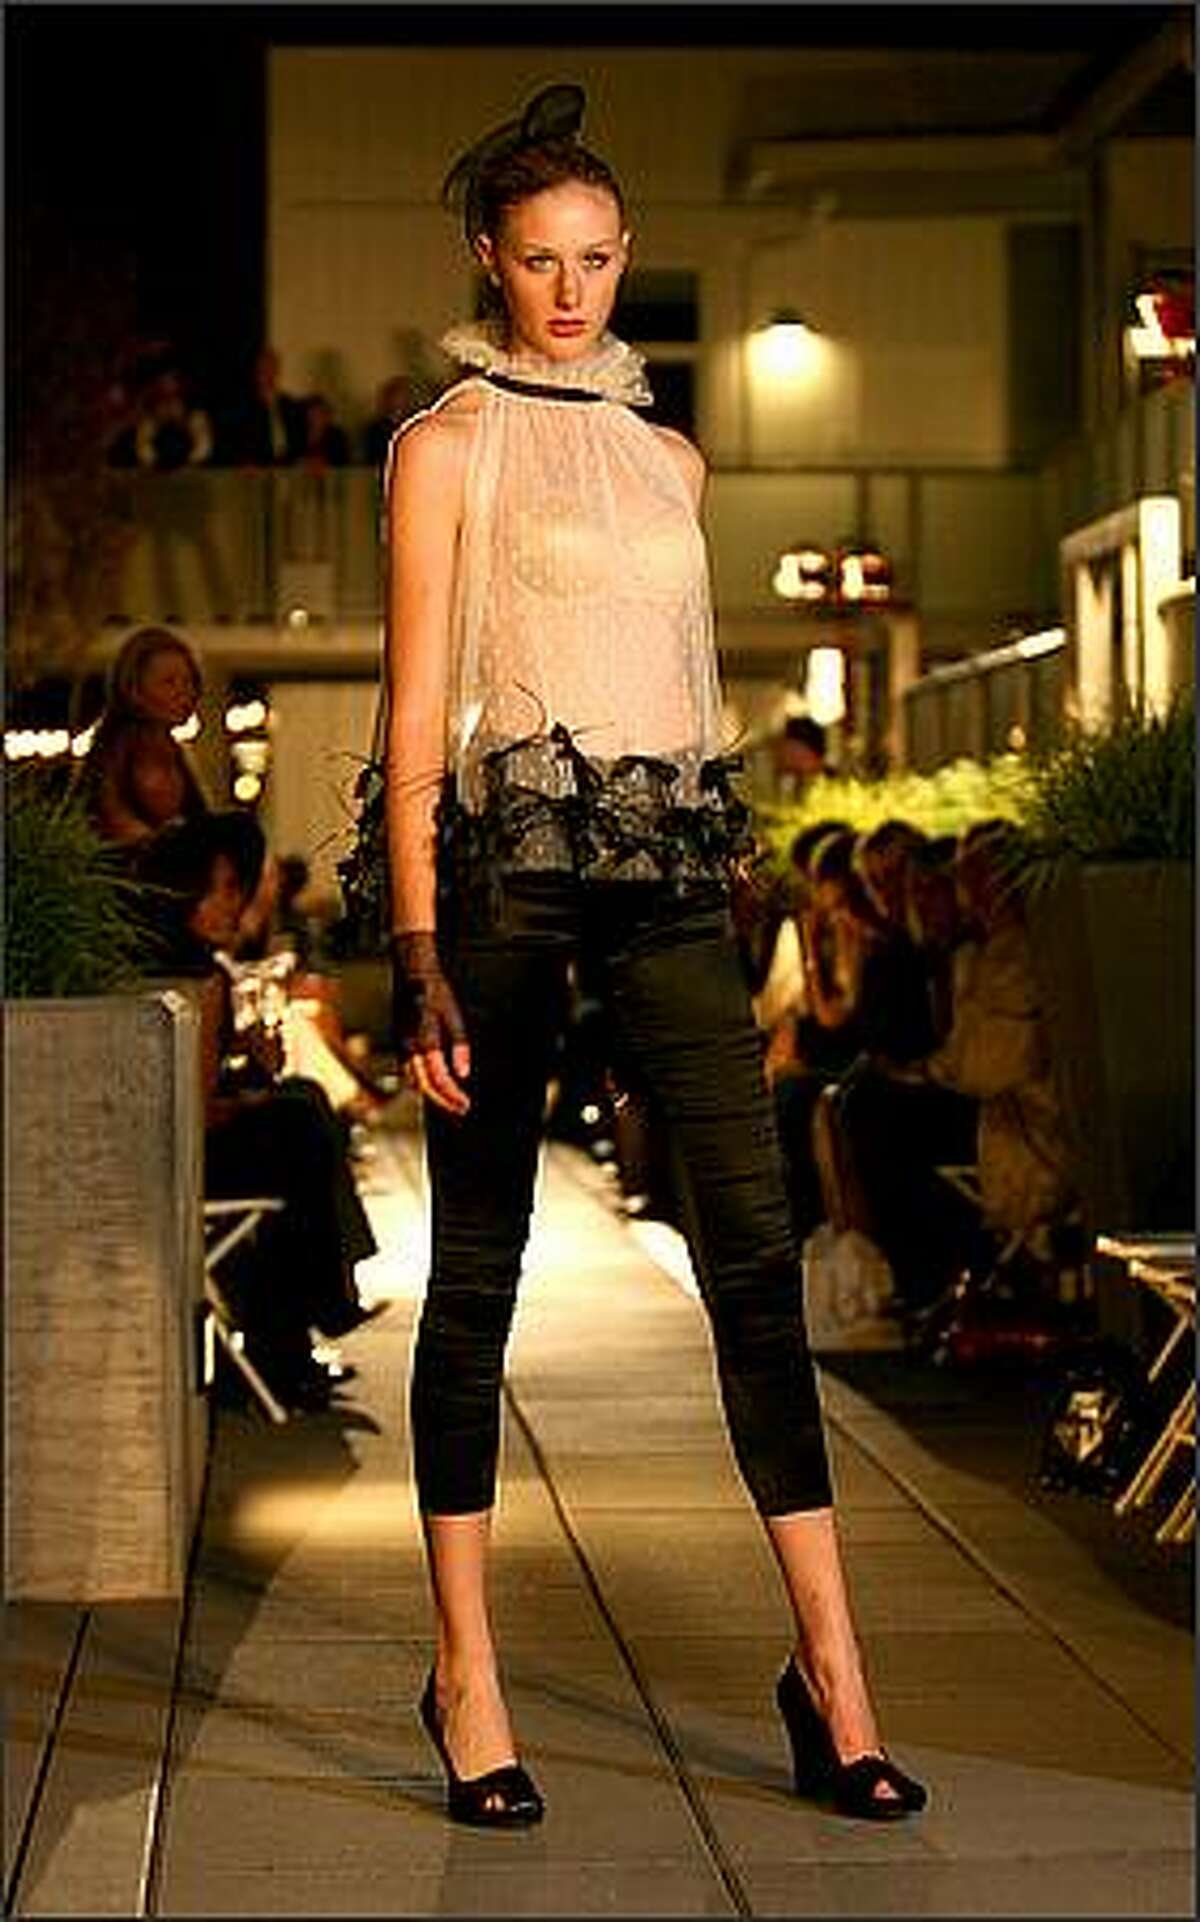 Madina Vadache unveiled her Spring 2009 ready-to-wear collection, Liquid Dreams at the Lumen Garden Courtyard in Seattle.